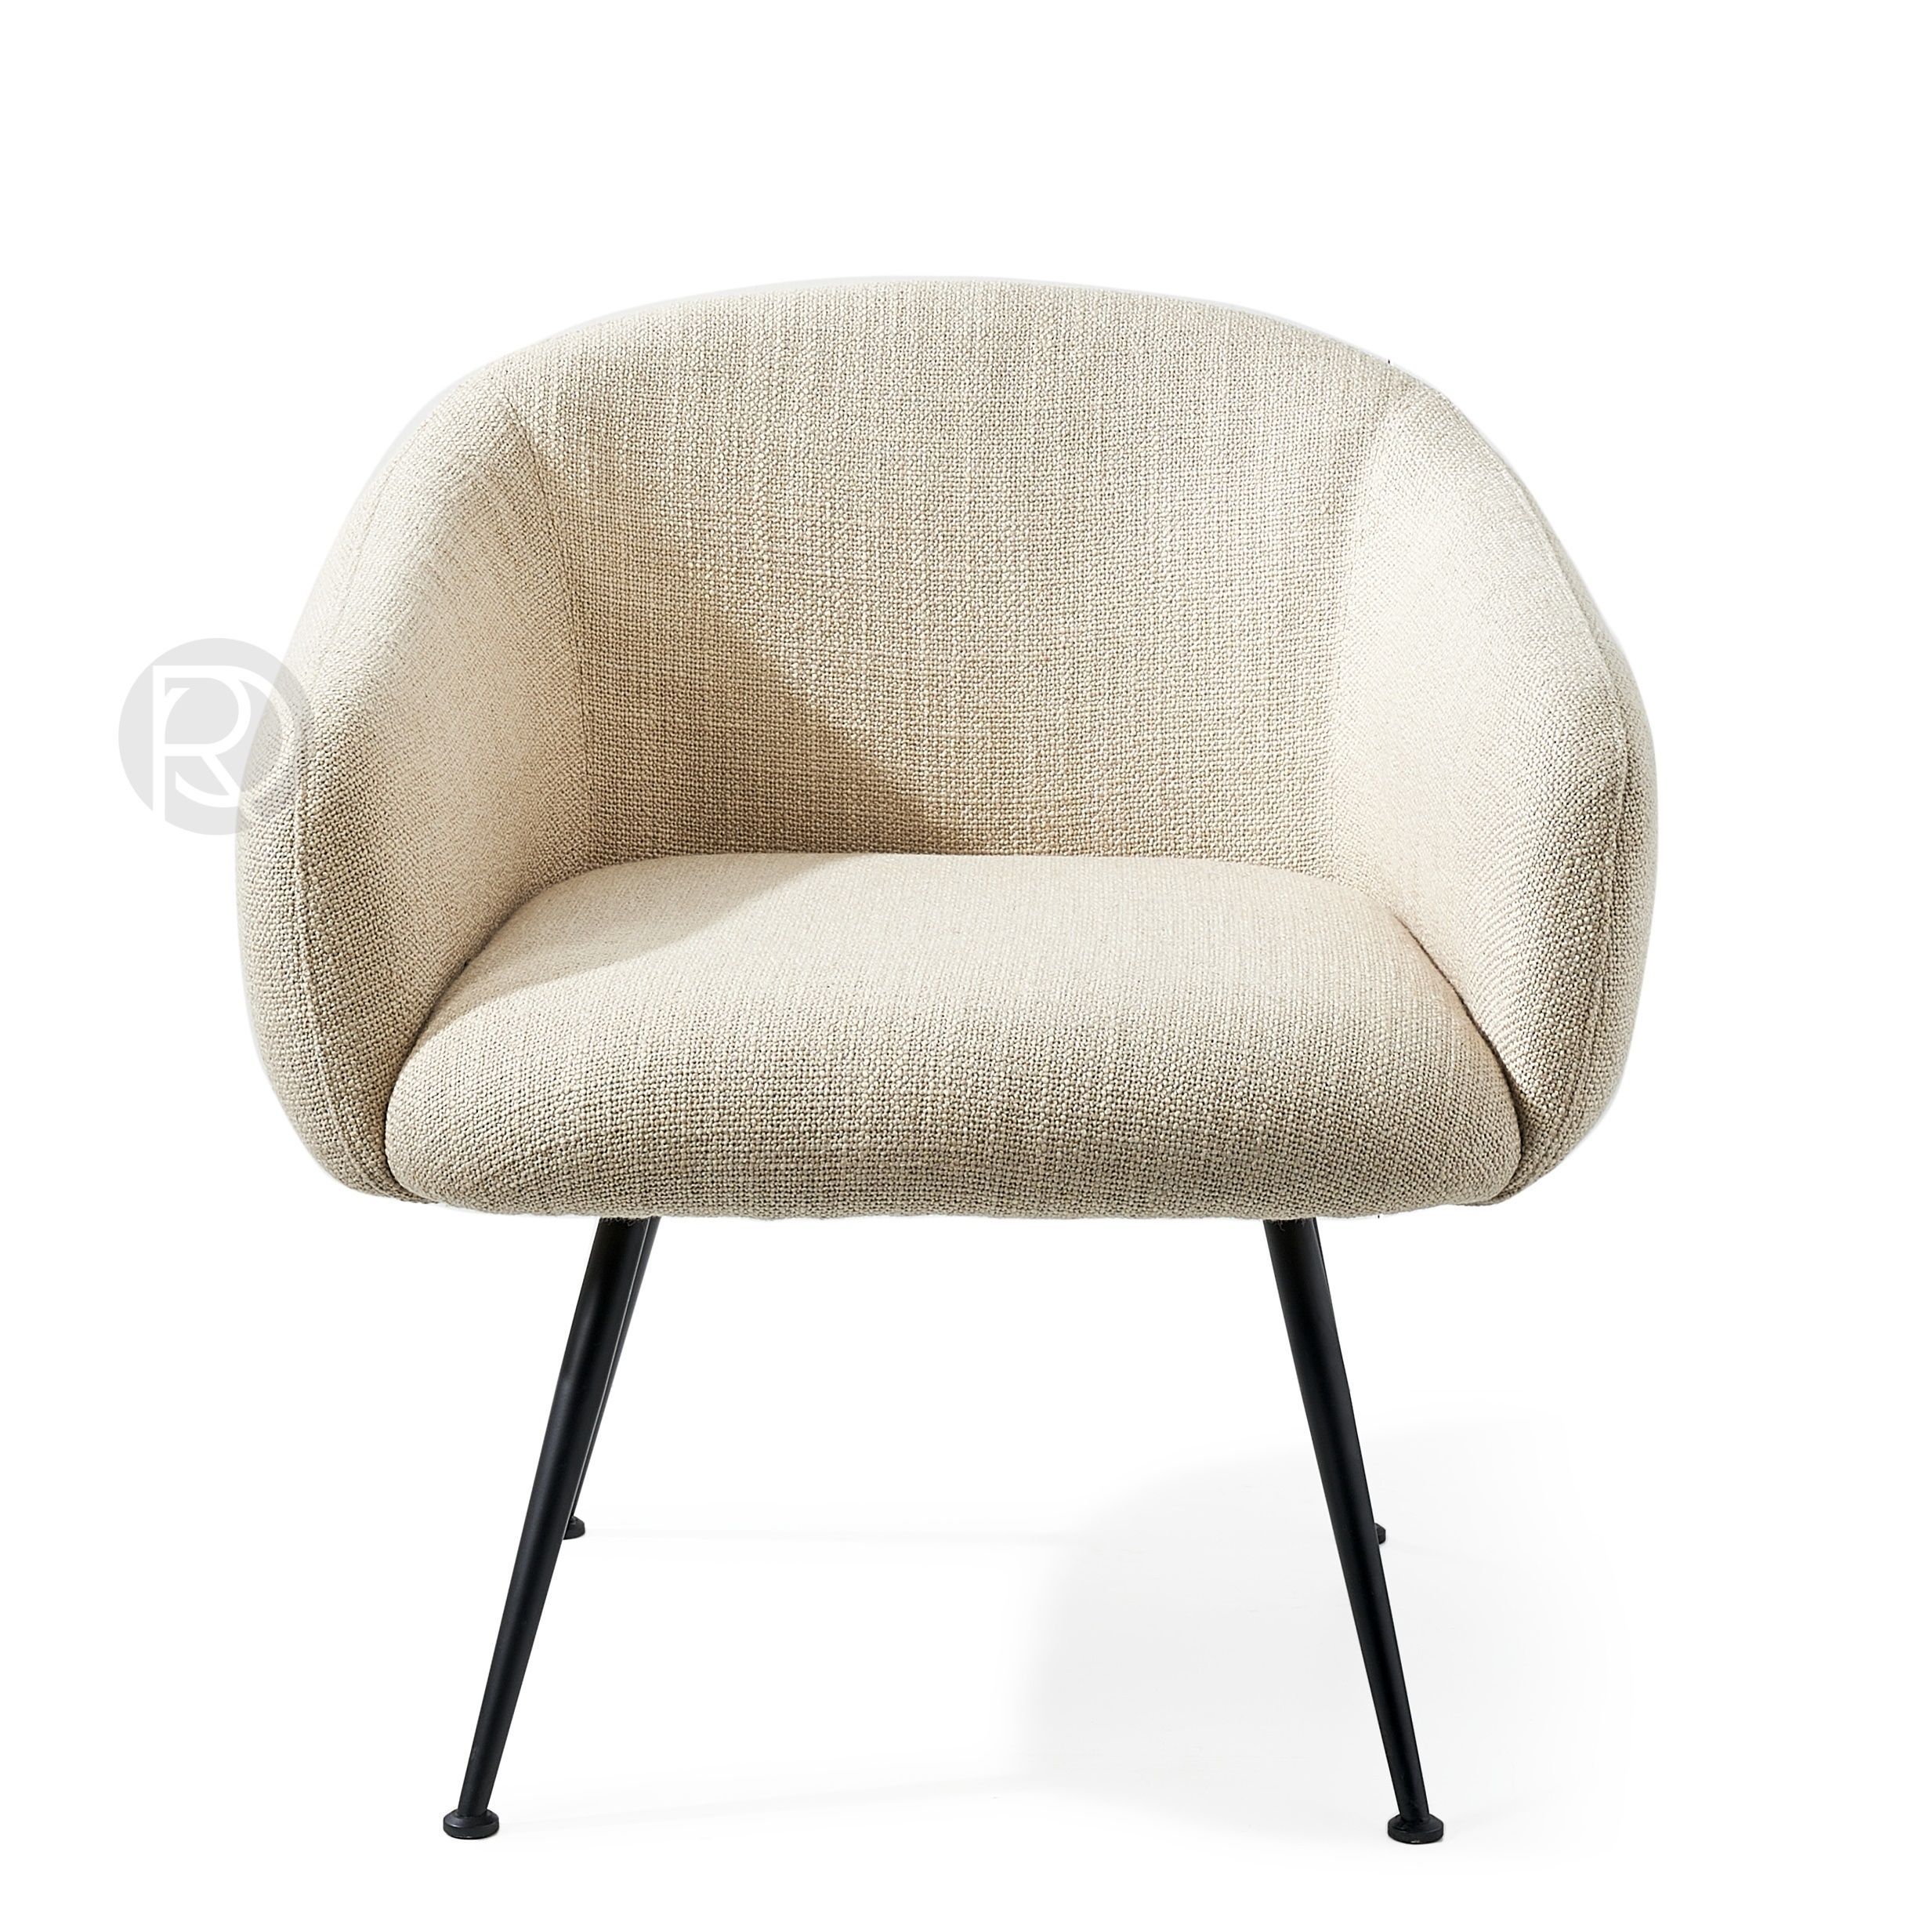 Buddy Chair by Pols Potten